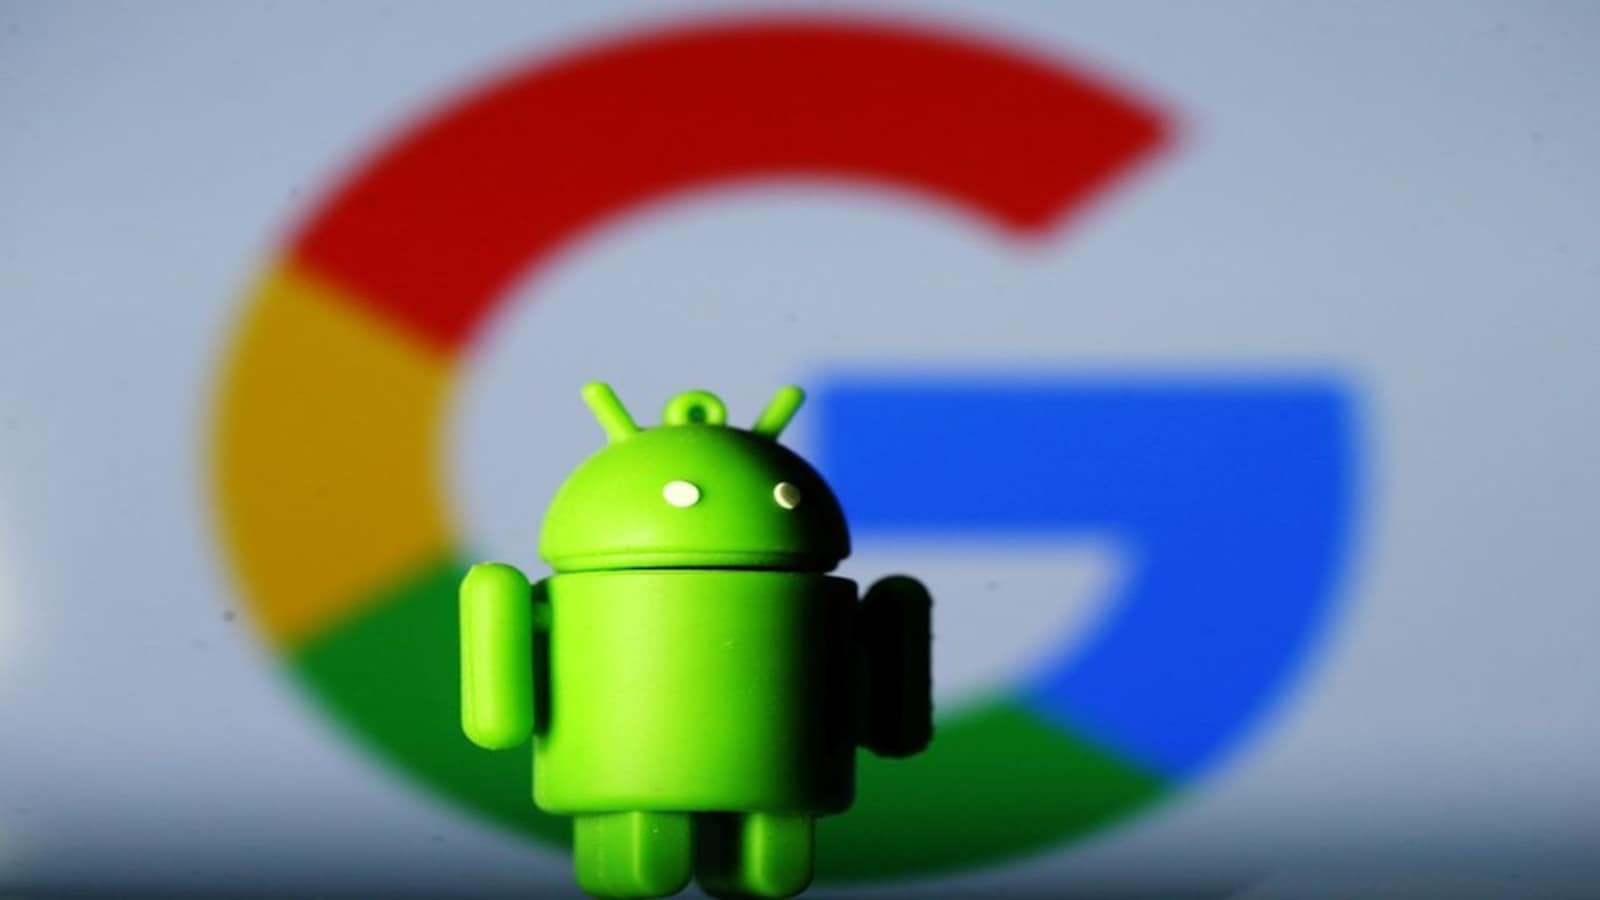 Android apps that want background location data will need Google Play's OK  - CNET